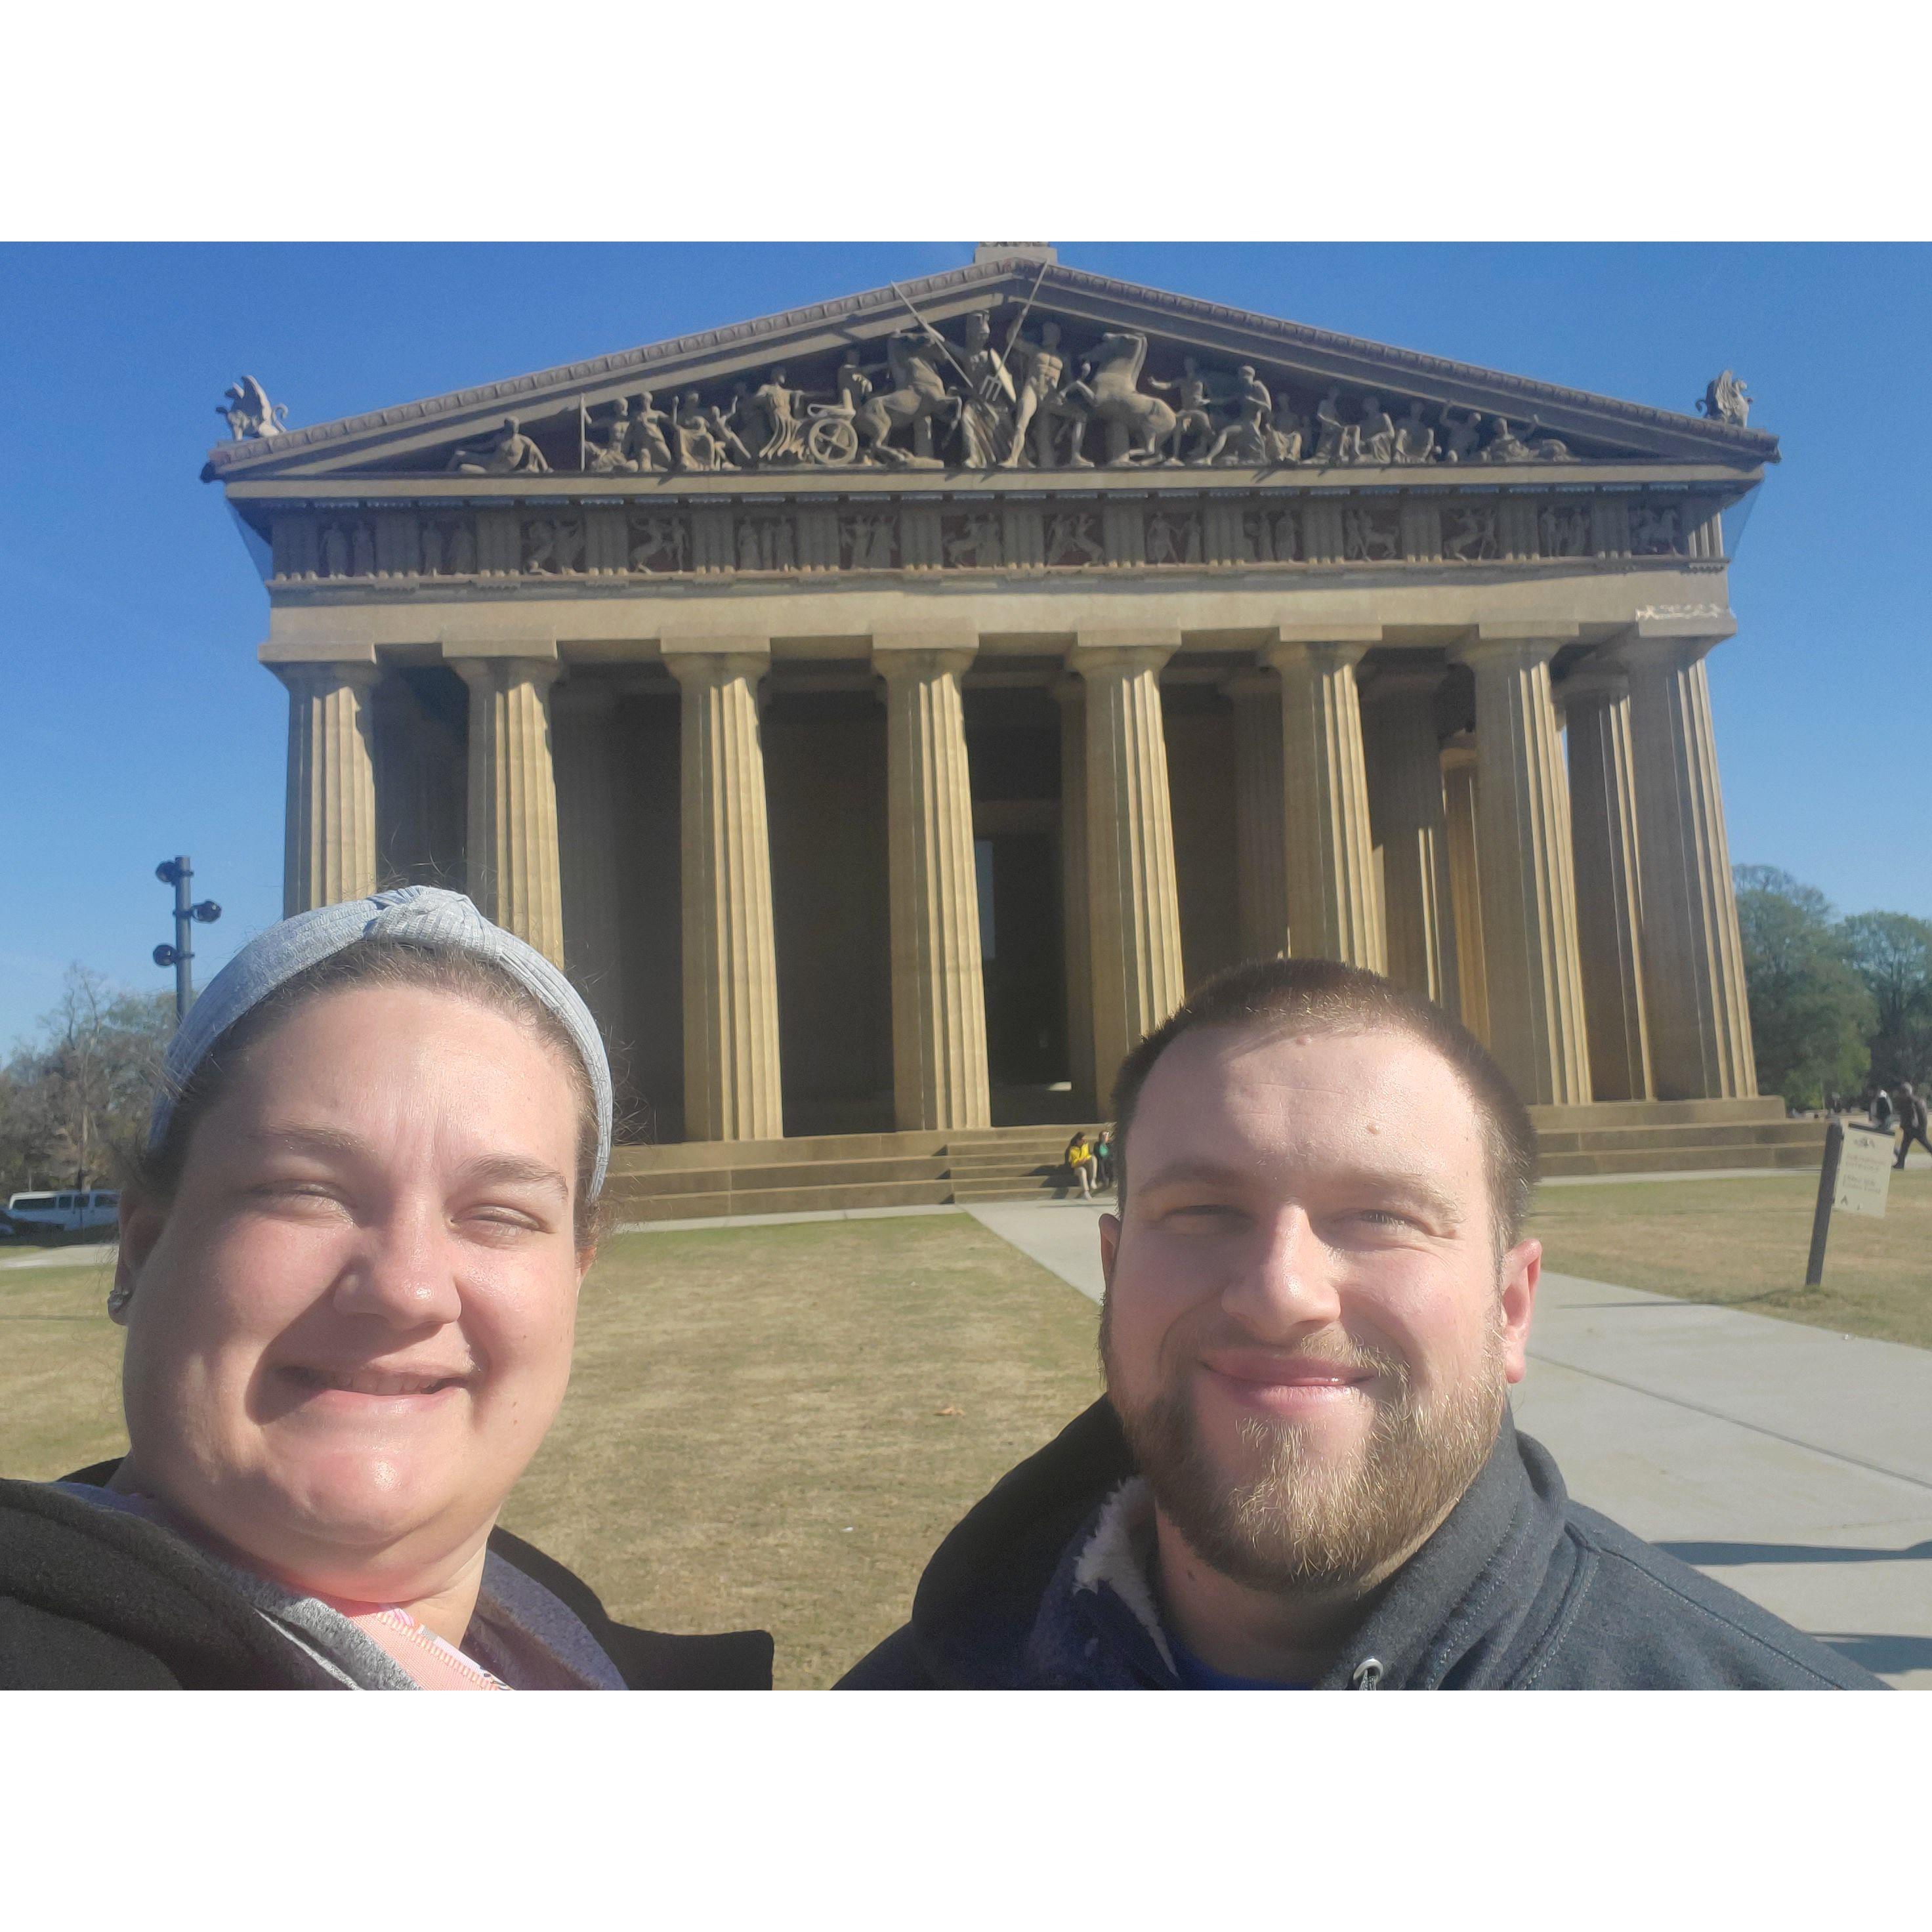 We can pretend we went to Greece but it was really the Parthenon recreation in Nashville